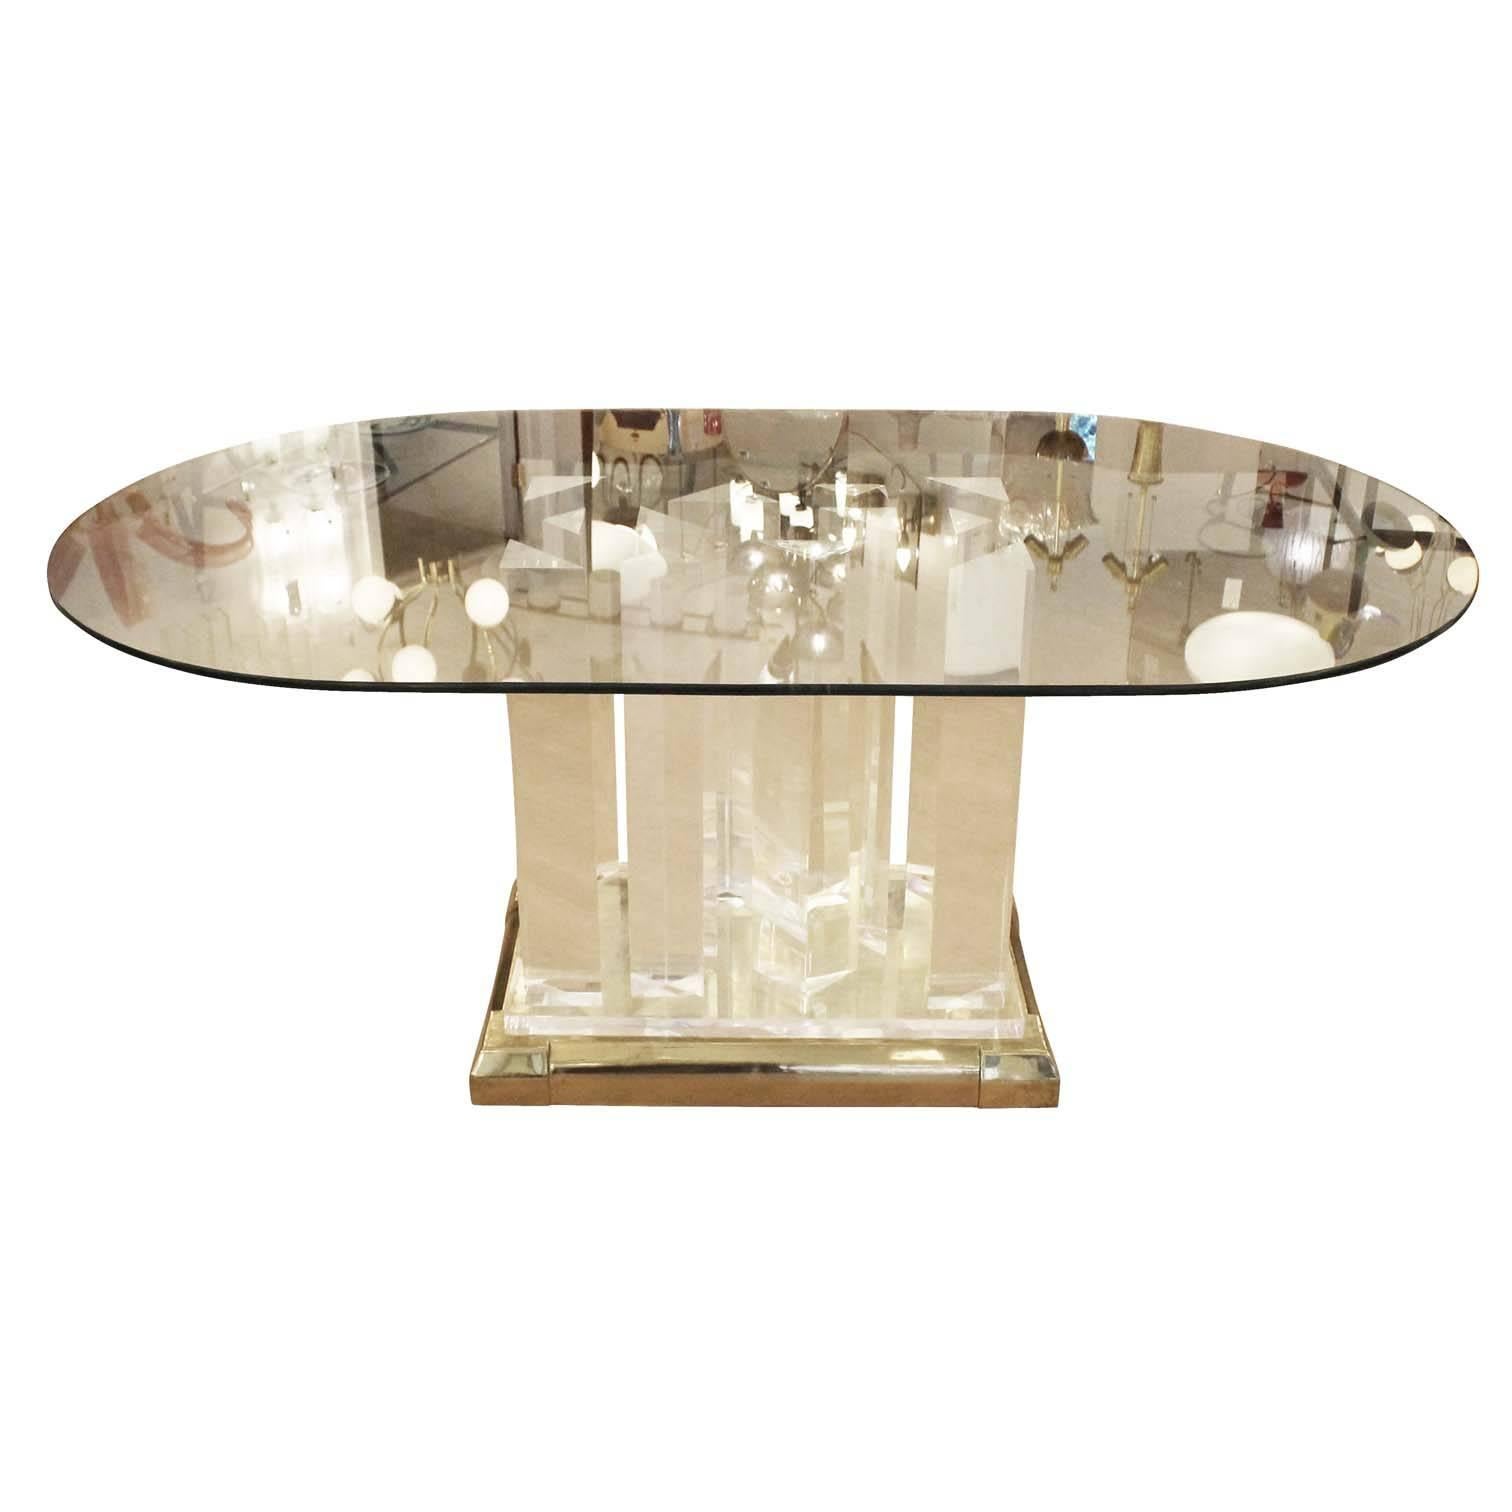 Breathtaking dining table in the style of American architect Jeffrey Bigelow featuring a brass-plated pedestal, Lucite base and oval glass top. The Lucite base is composed of triangular 